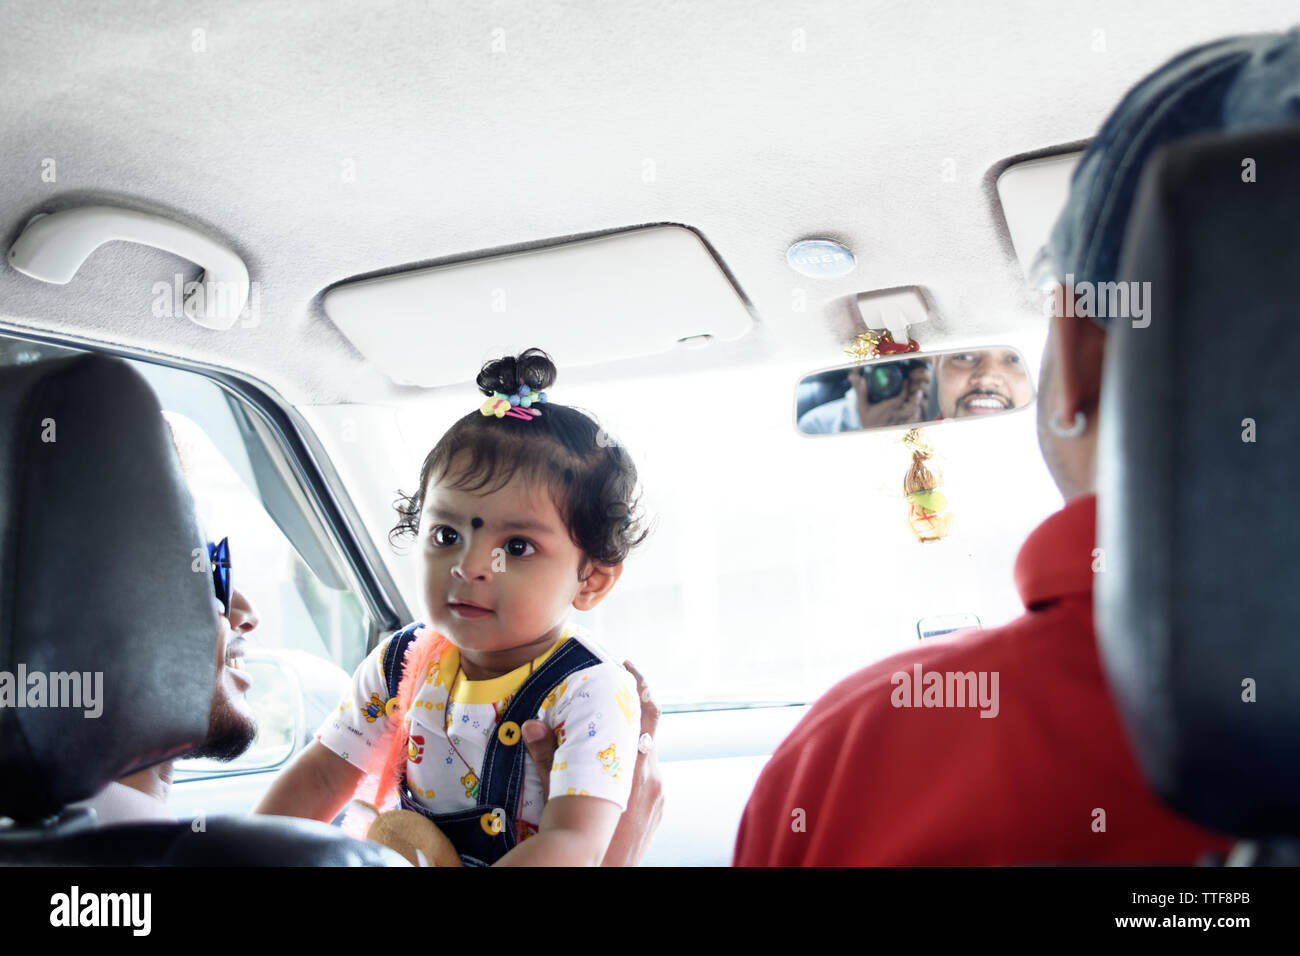 A beautiful Indian baby girl child riding in a car Stock Photo